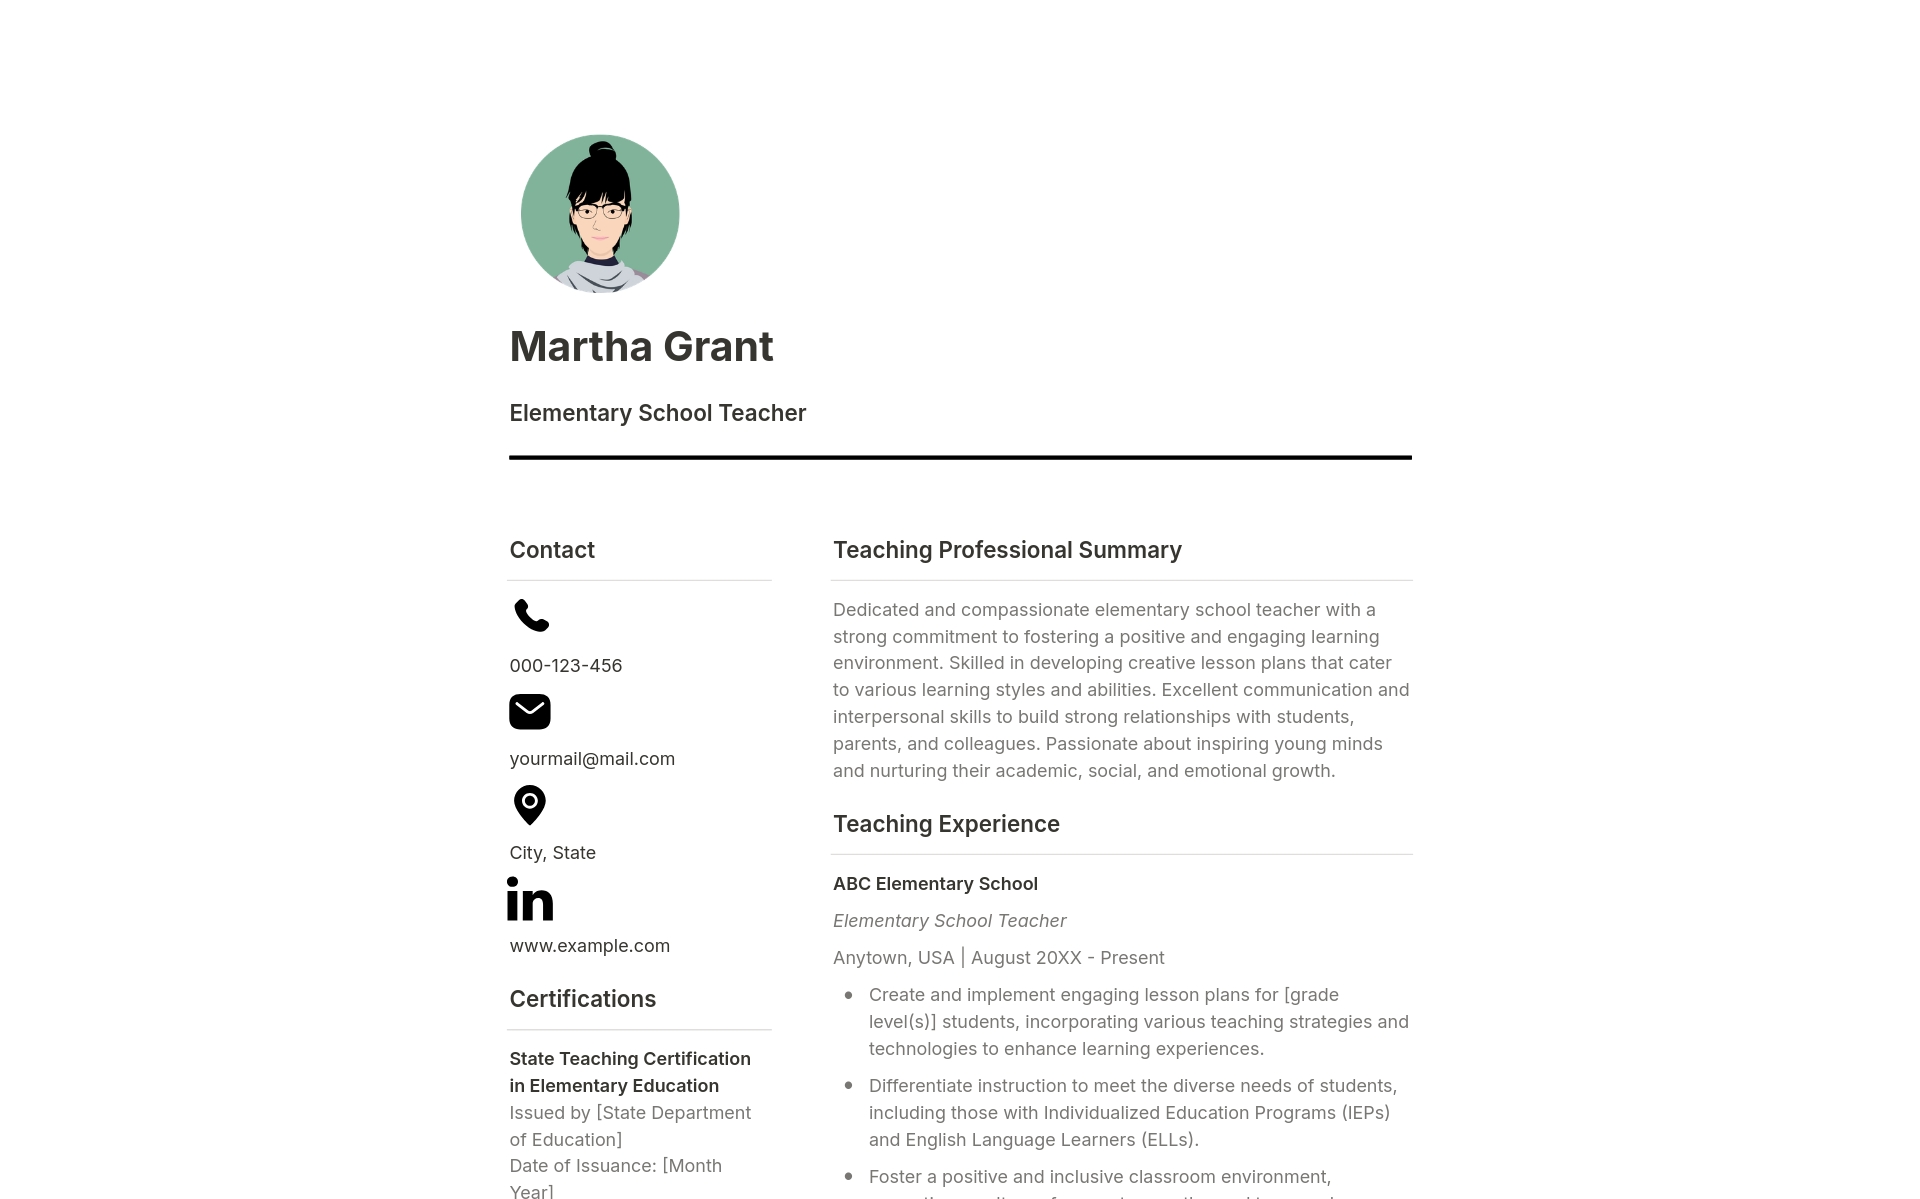 Modernize your approach to job applications with this cutting-edge Modern Teacher Toolkit. Featuring a sleek resume, persuasive cover letter, and comprehensive references template.